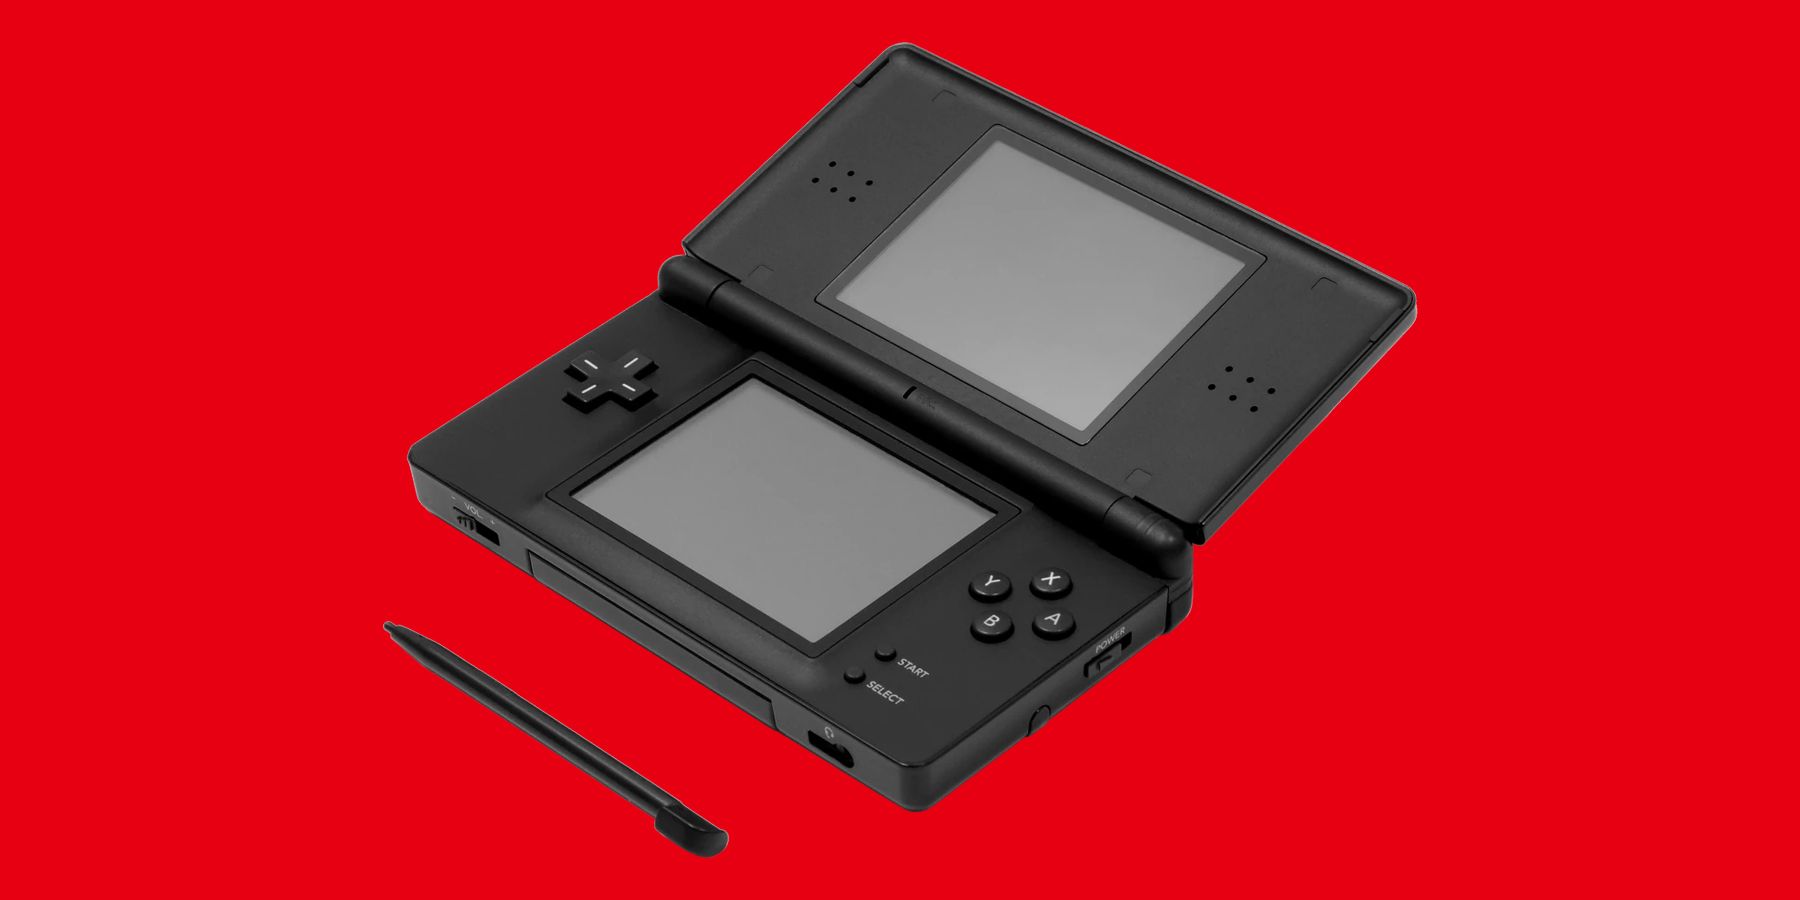 Super Rare DSi Pulled from Auction